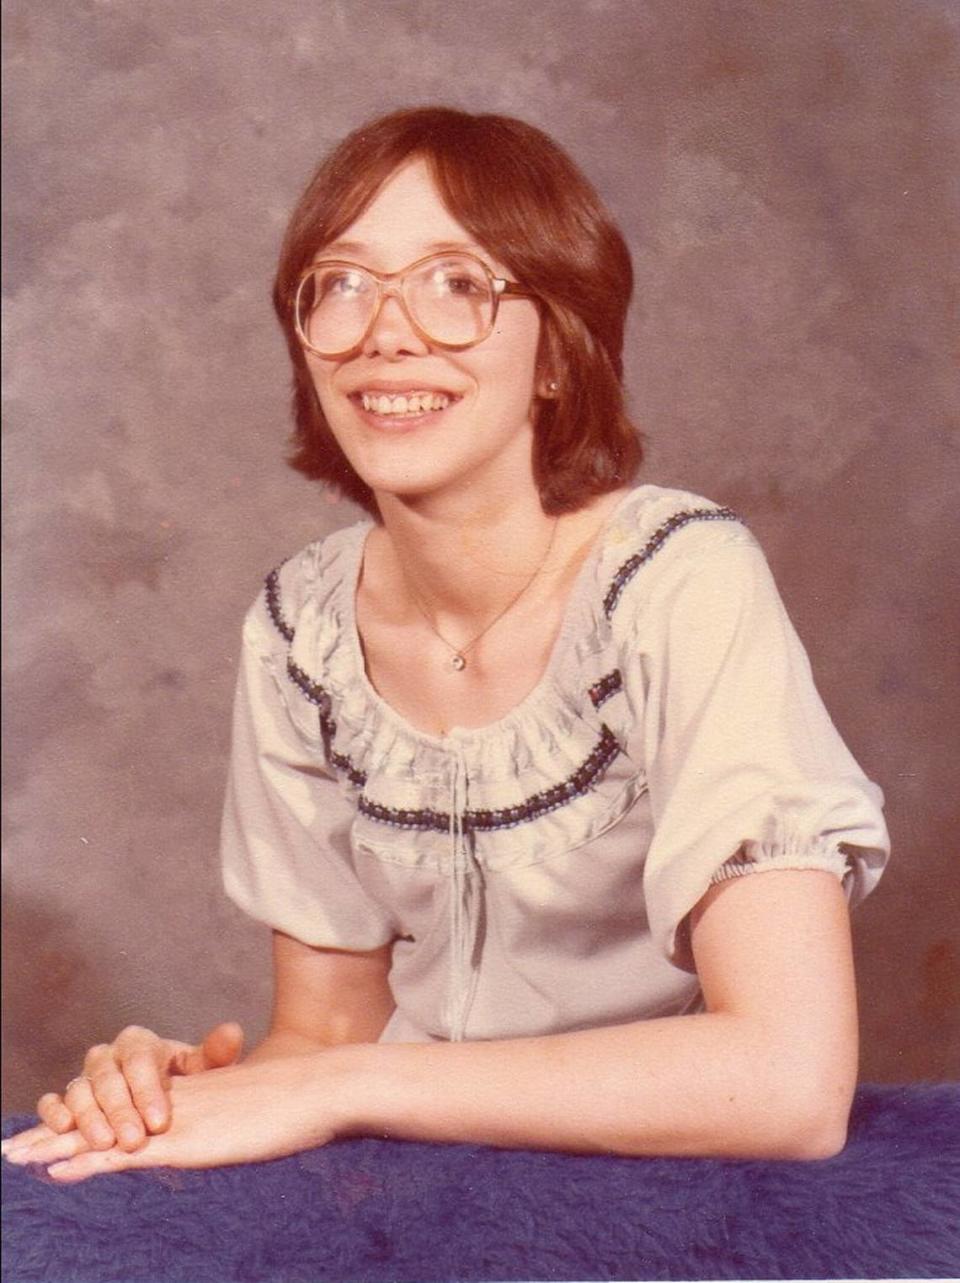 Sandra Hemme as a teenager Provided by the Innocence Project